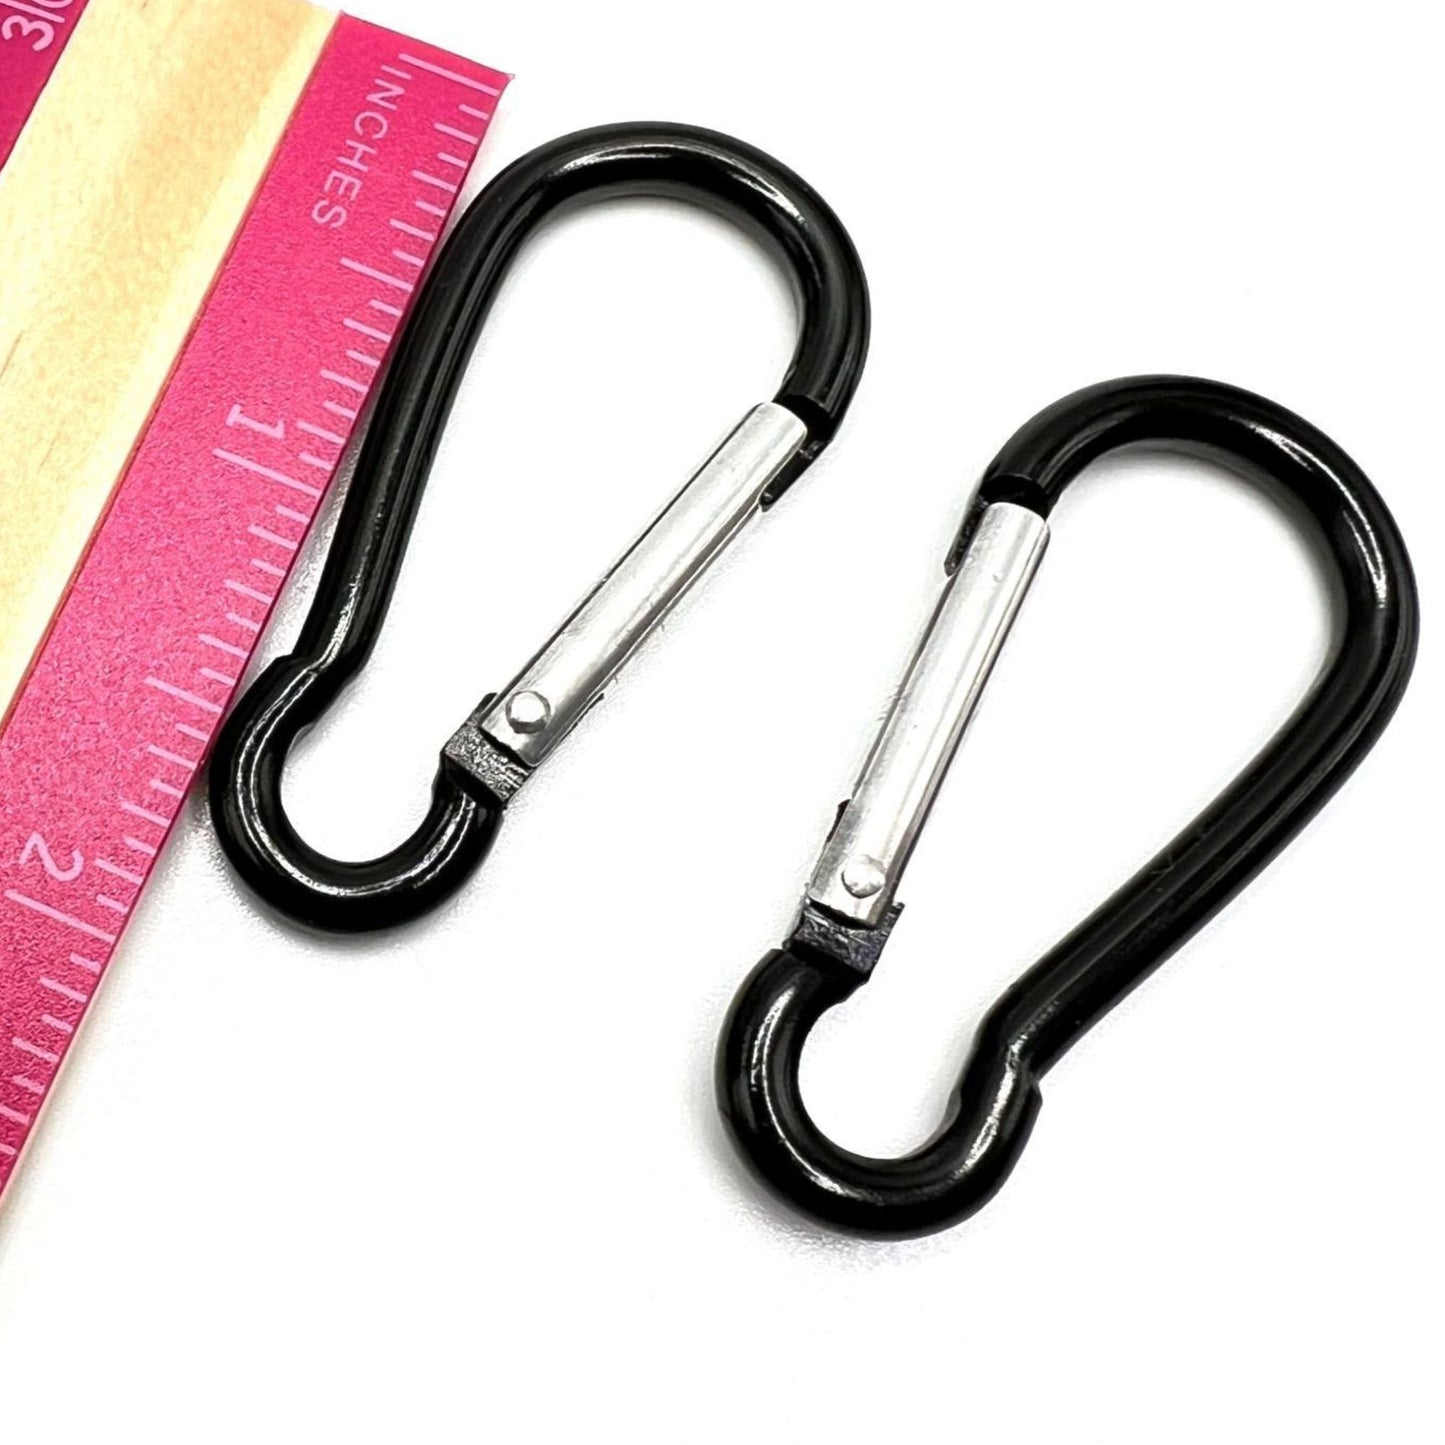 Handmade black acrylic chain with carabiner clips. Displayed on a table with a ruler showing the carabiner length as 1.5".